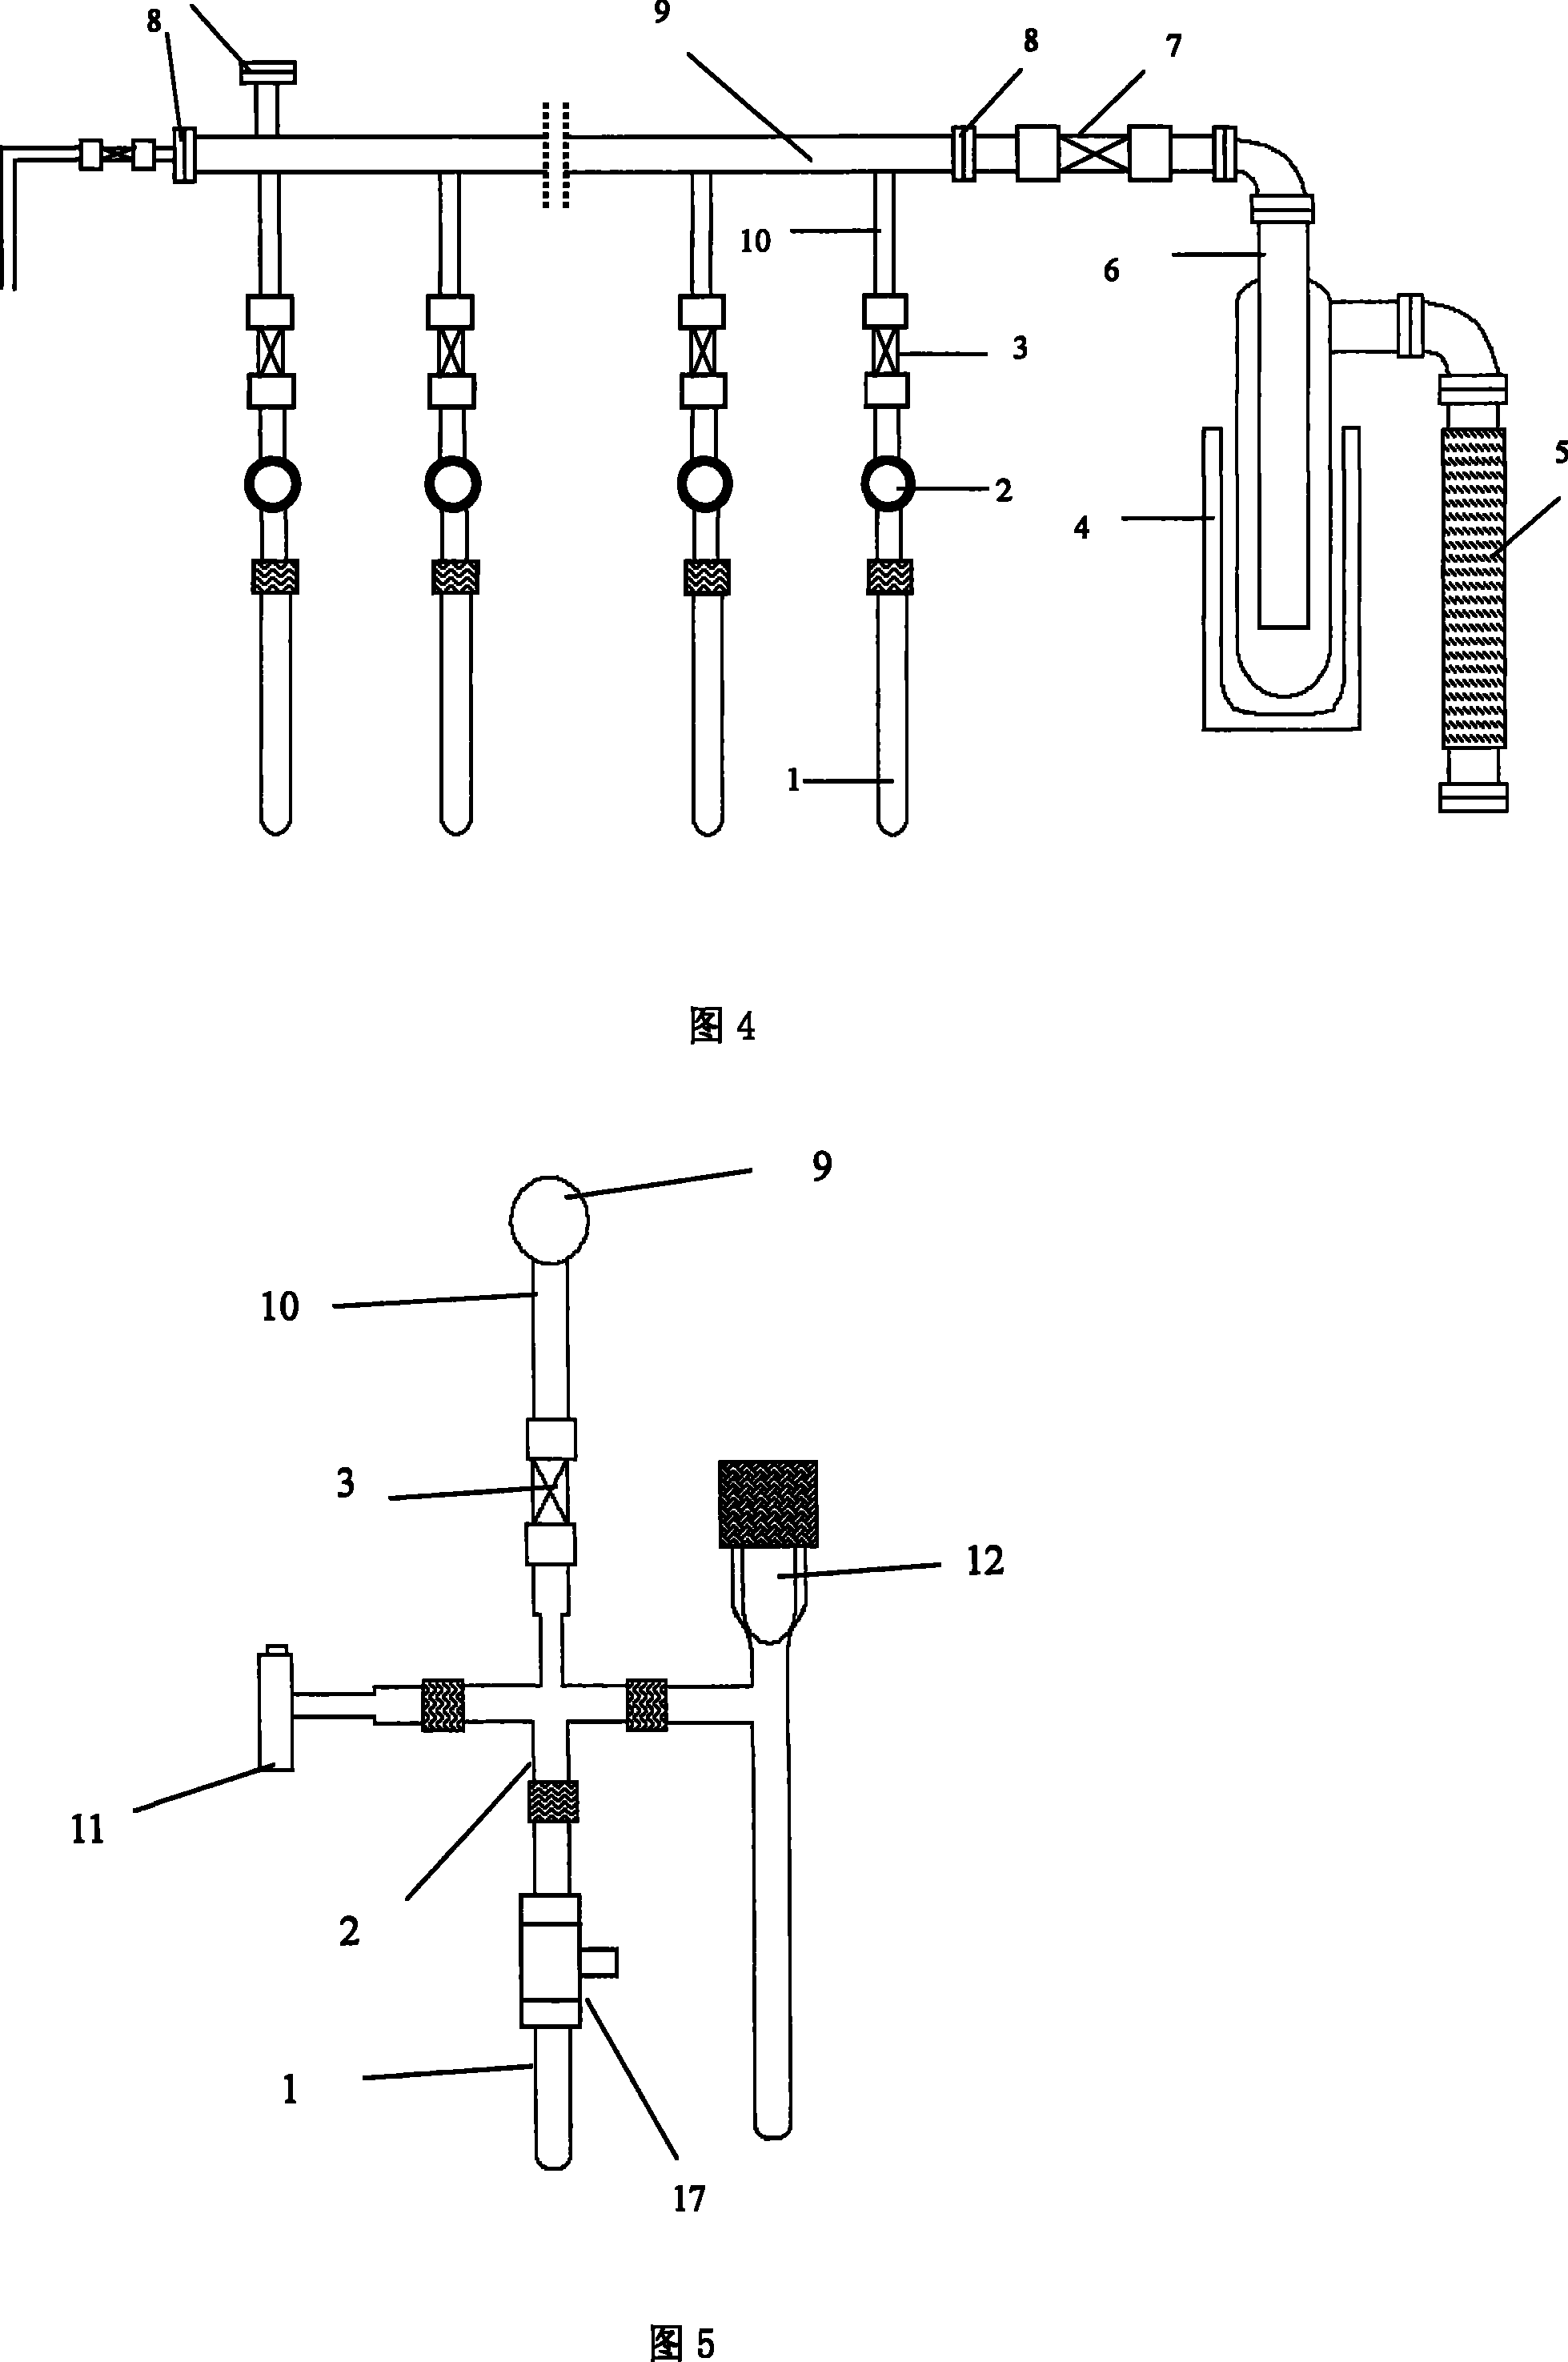 Accelerator mass spectrometry carbon-14 dating and sampling device